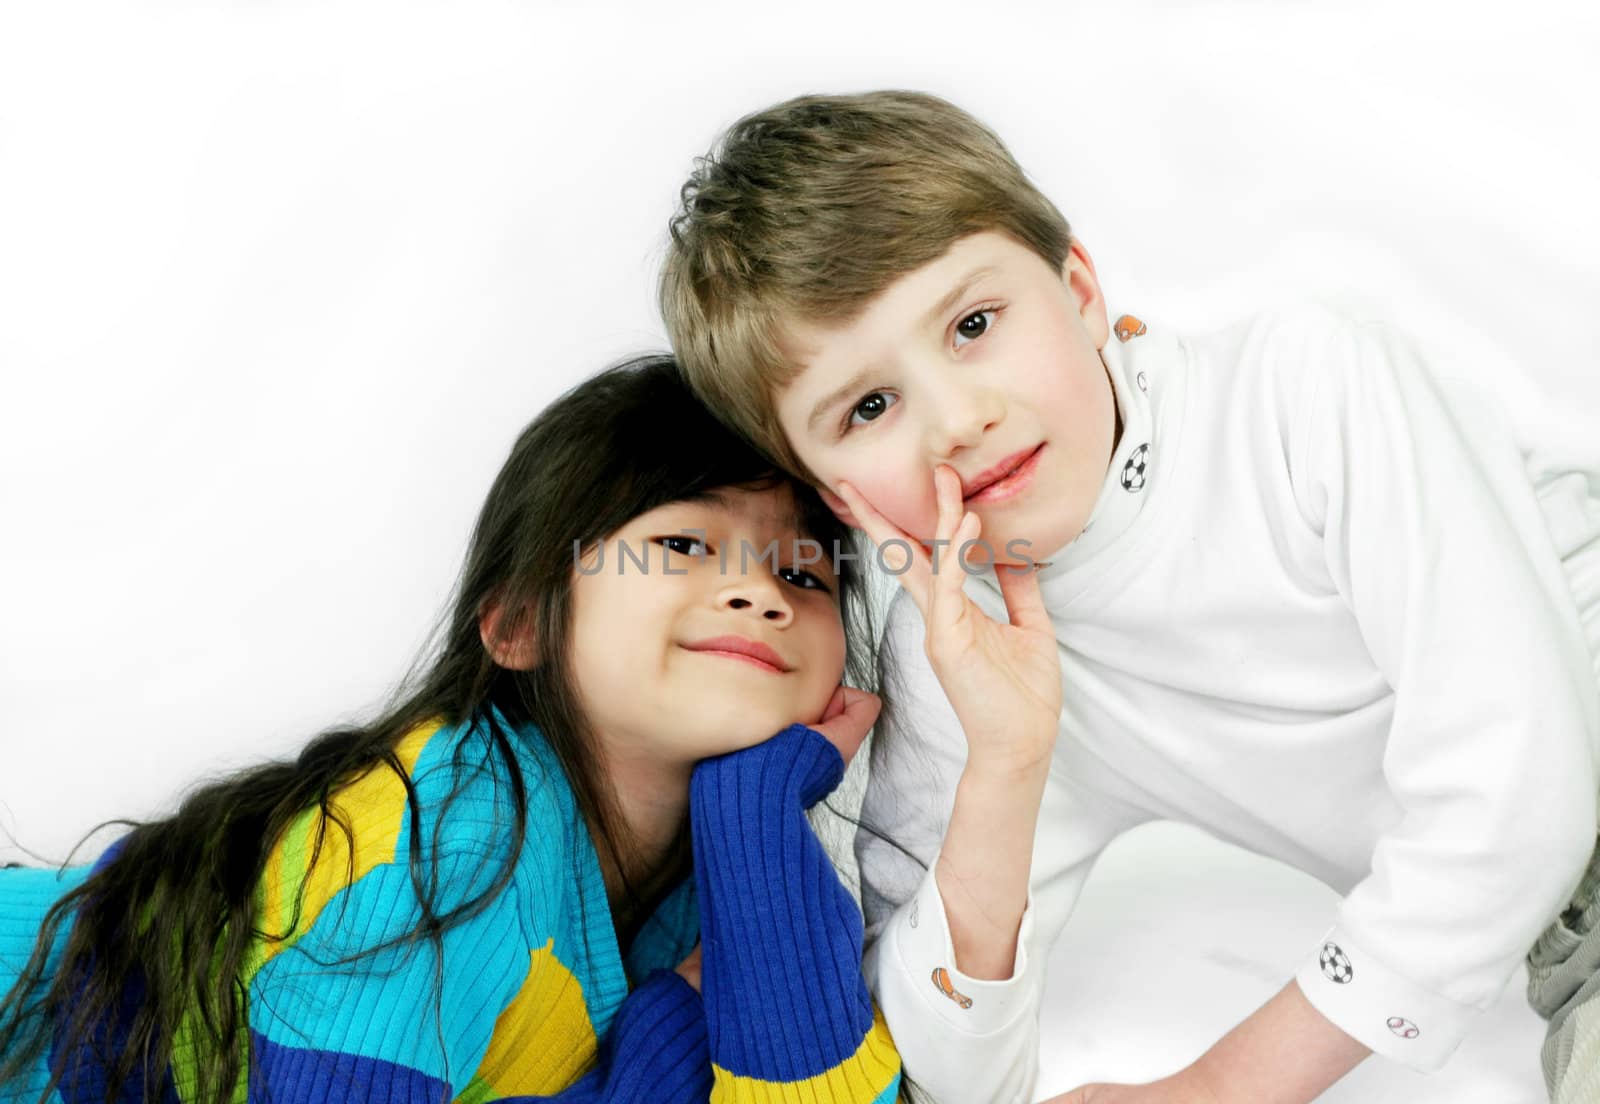 Multiethnic friends, young boy and girl by jarenwicklund